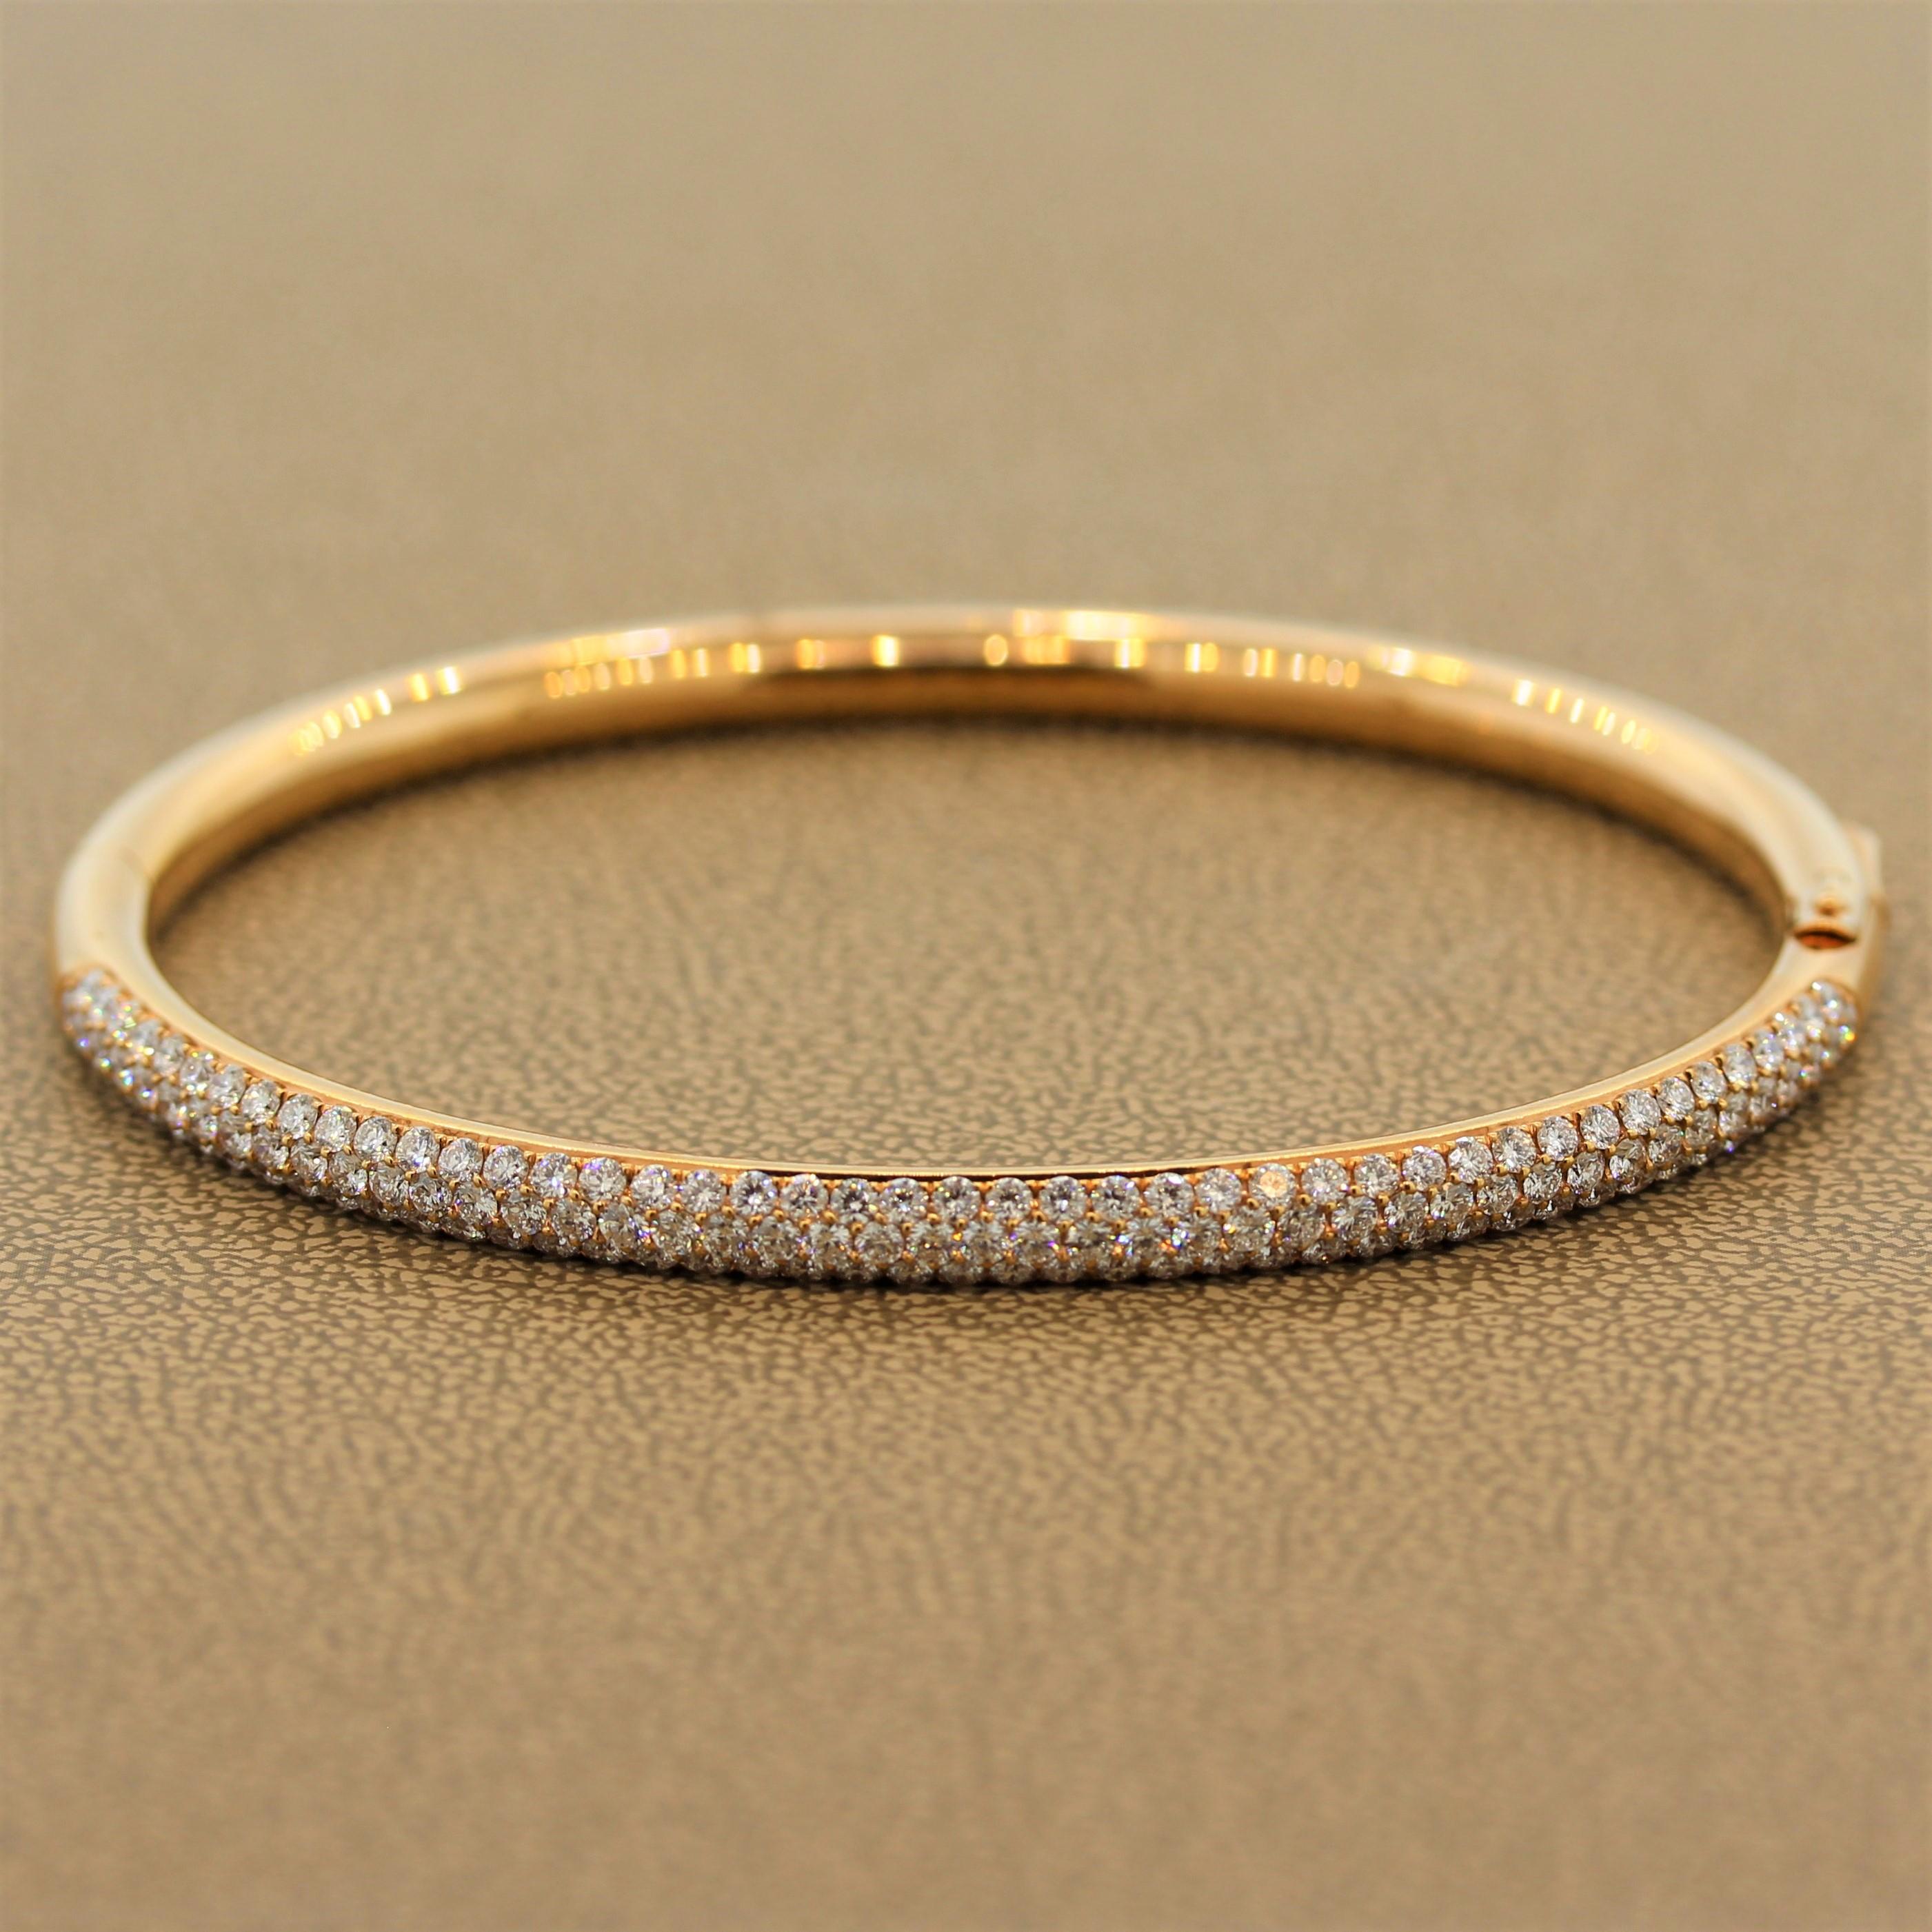 A hard bracelet with timeless elegance featuring 2.86 carats of VS quality diamonds. The colorless pave set diamonds are set in an 18K rose gold with a slight oval shape to adhere to the natural shape of the wrist. The diamonds are set halfway on